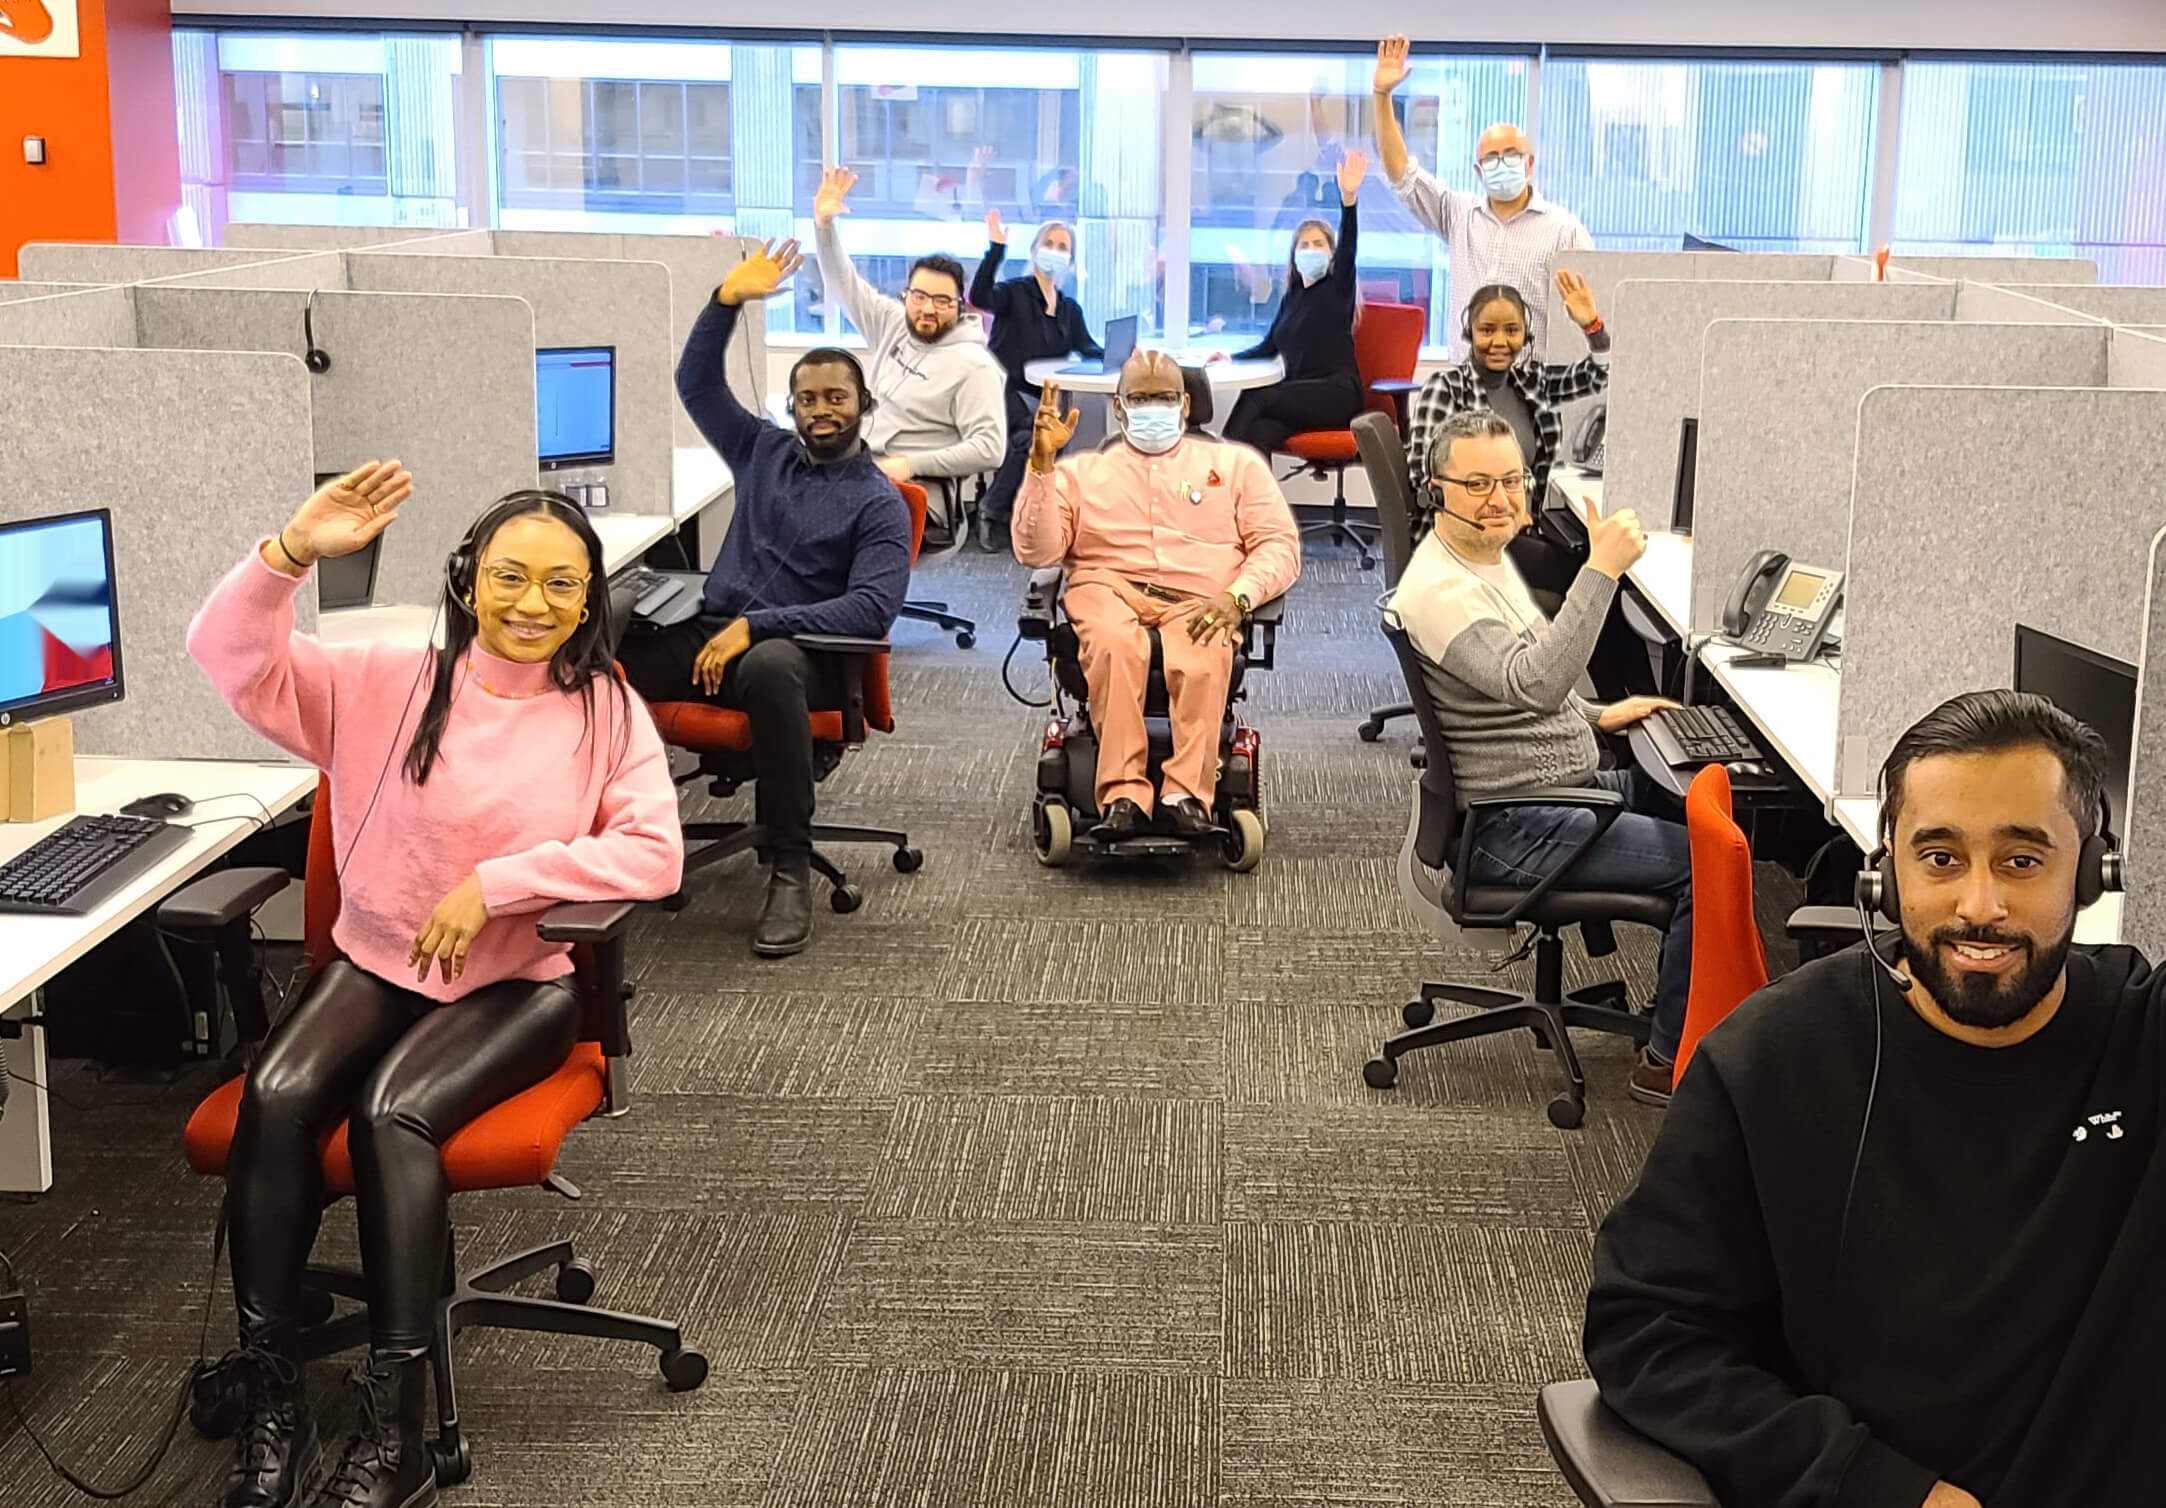 Call center office group smiling and waving